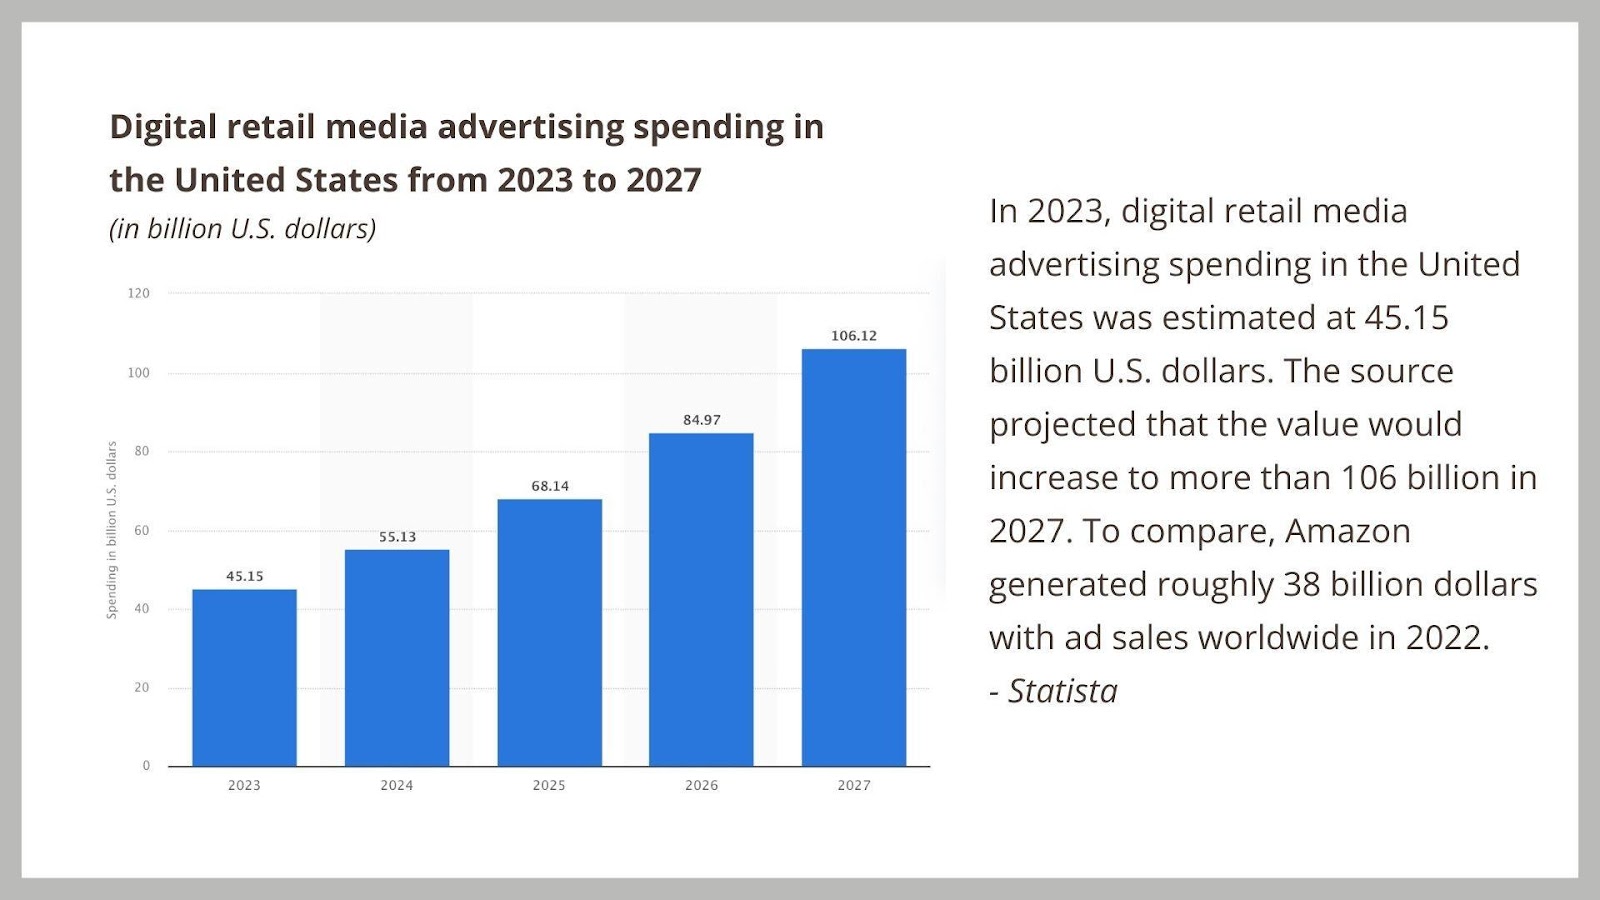 In 2023, digital retail media advertising spending in the United States was estimated at 45.15 billion U.S. dollars. The source projected that the value would increase to more than 106 billion in 2027. To compare, Amazon generated roughly 38 billion dollars with ad sales worldwide in 2022.